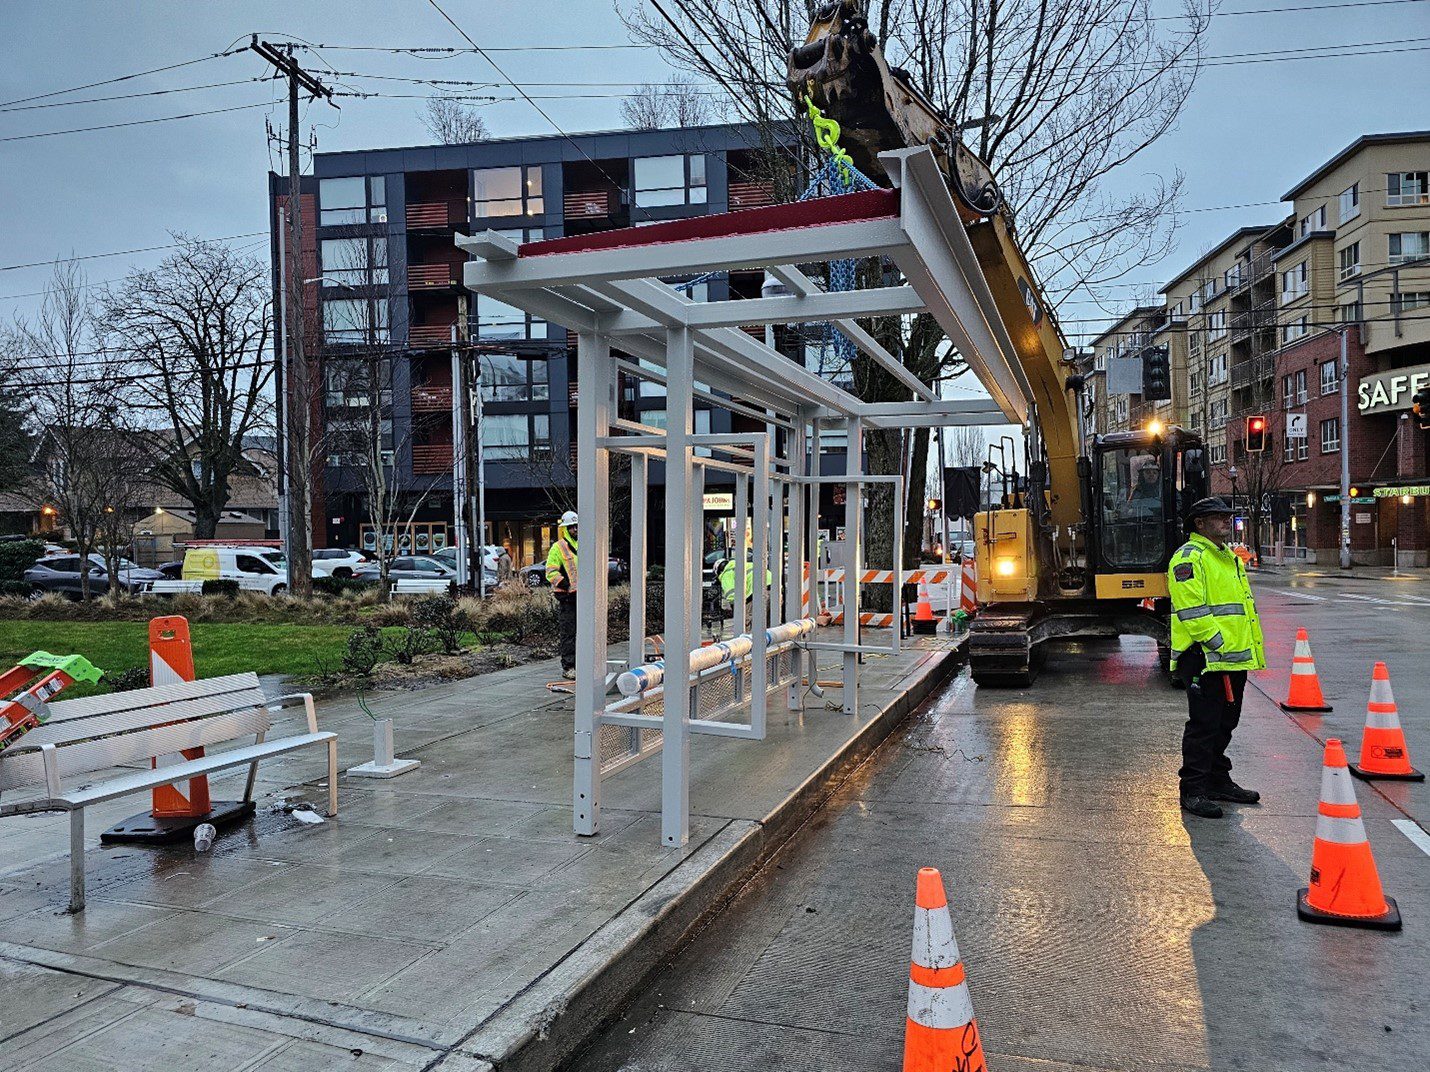 Crews working to install a new bus shelter with heavy equipment. Construction workers and a traffic officer stand next to the installation work. Large buildings are in the background.